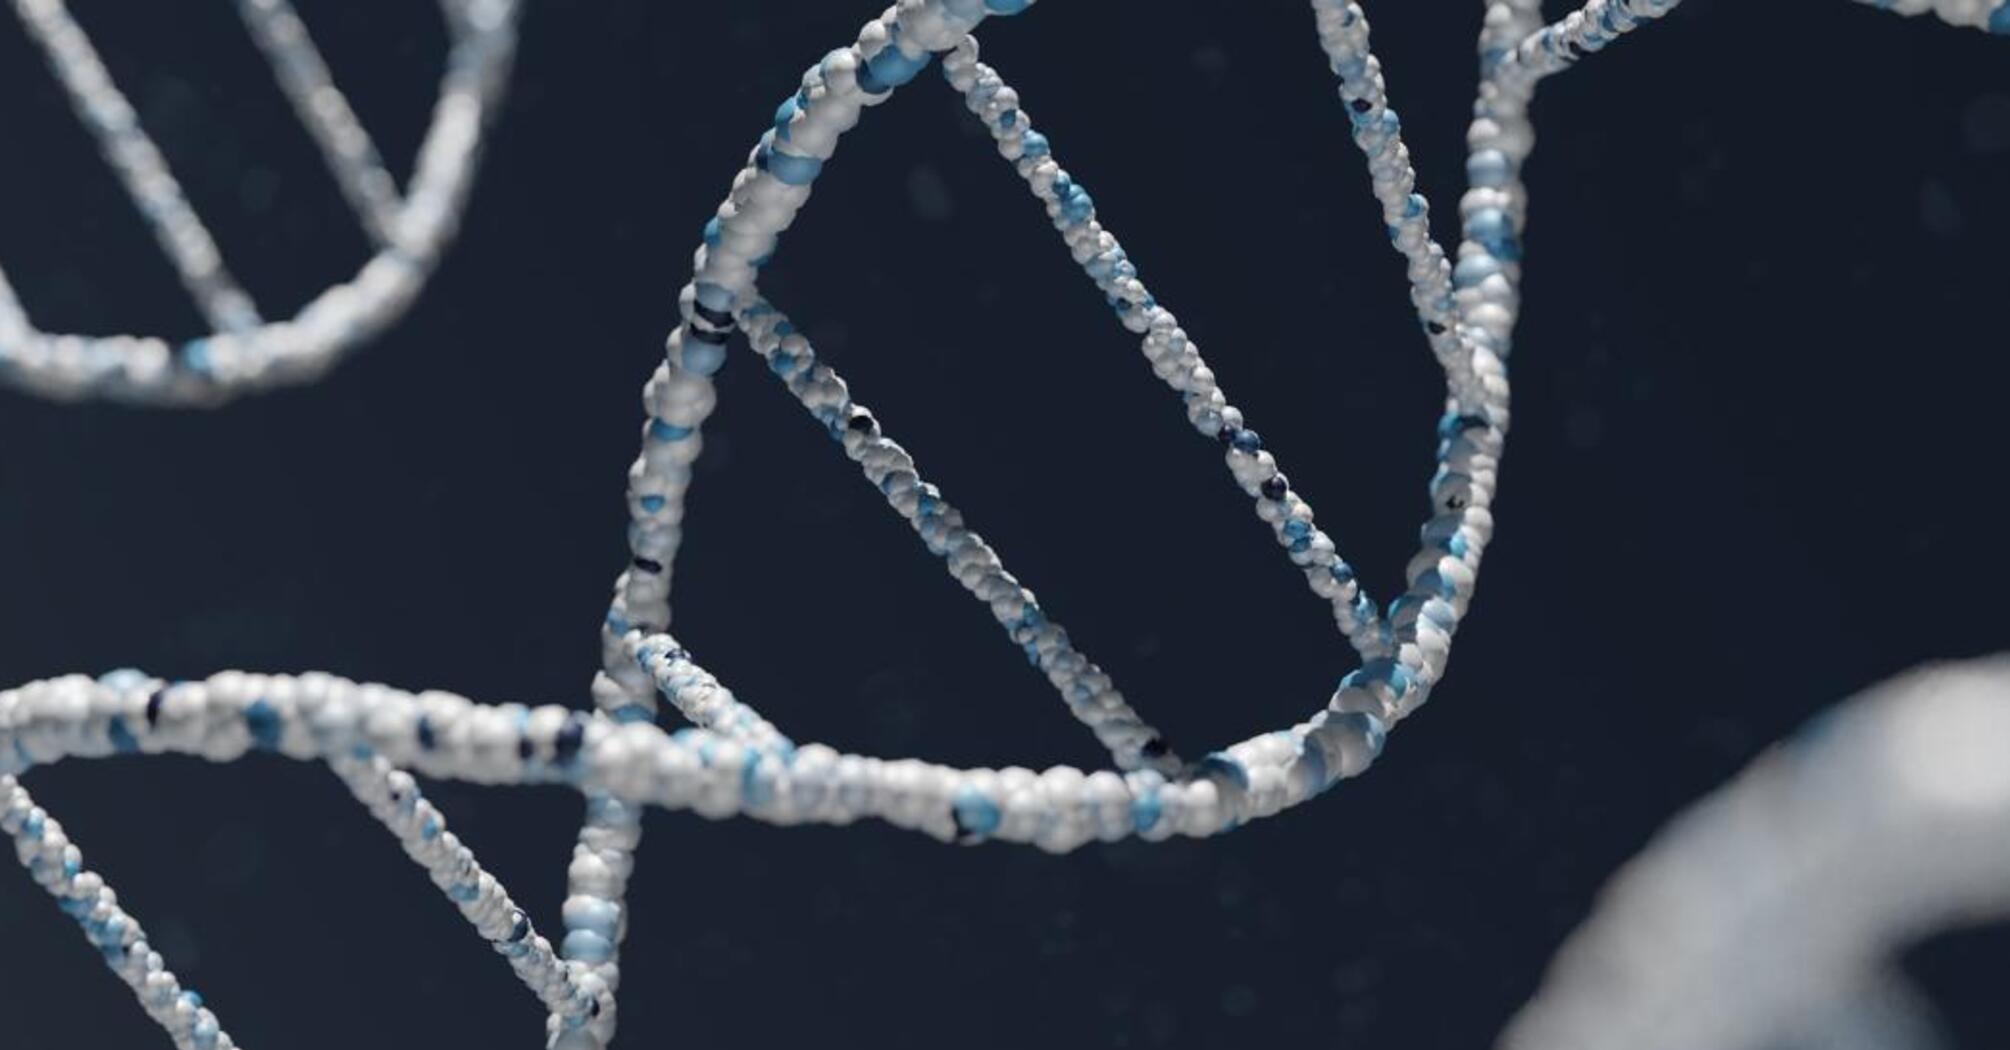 Five interesting facts about DNA